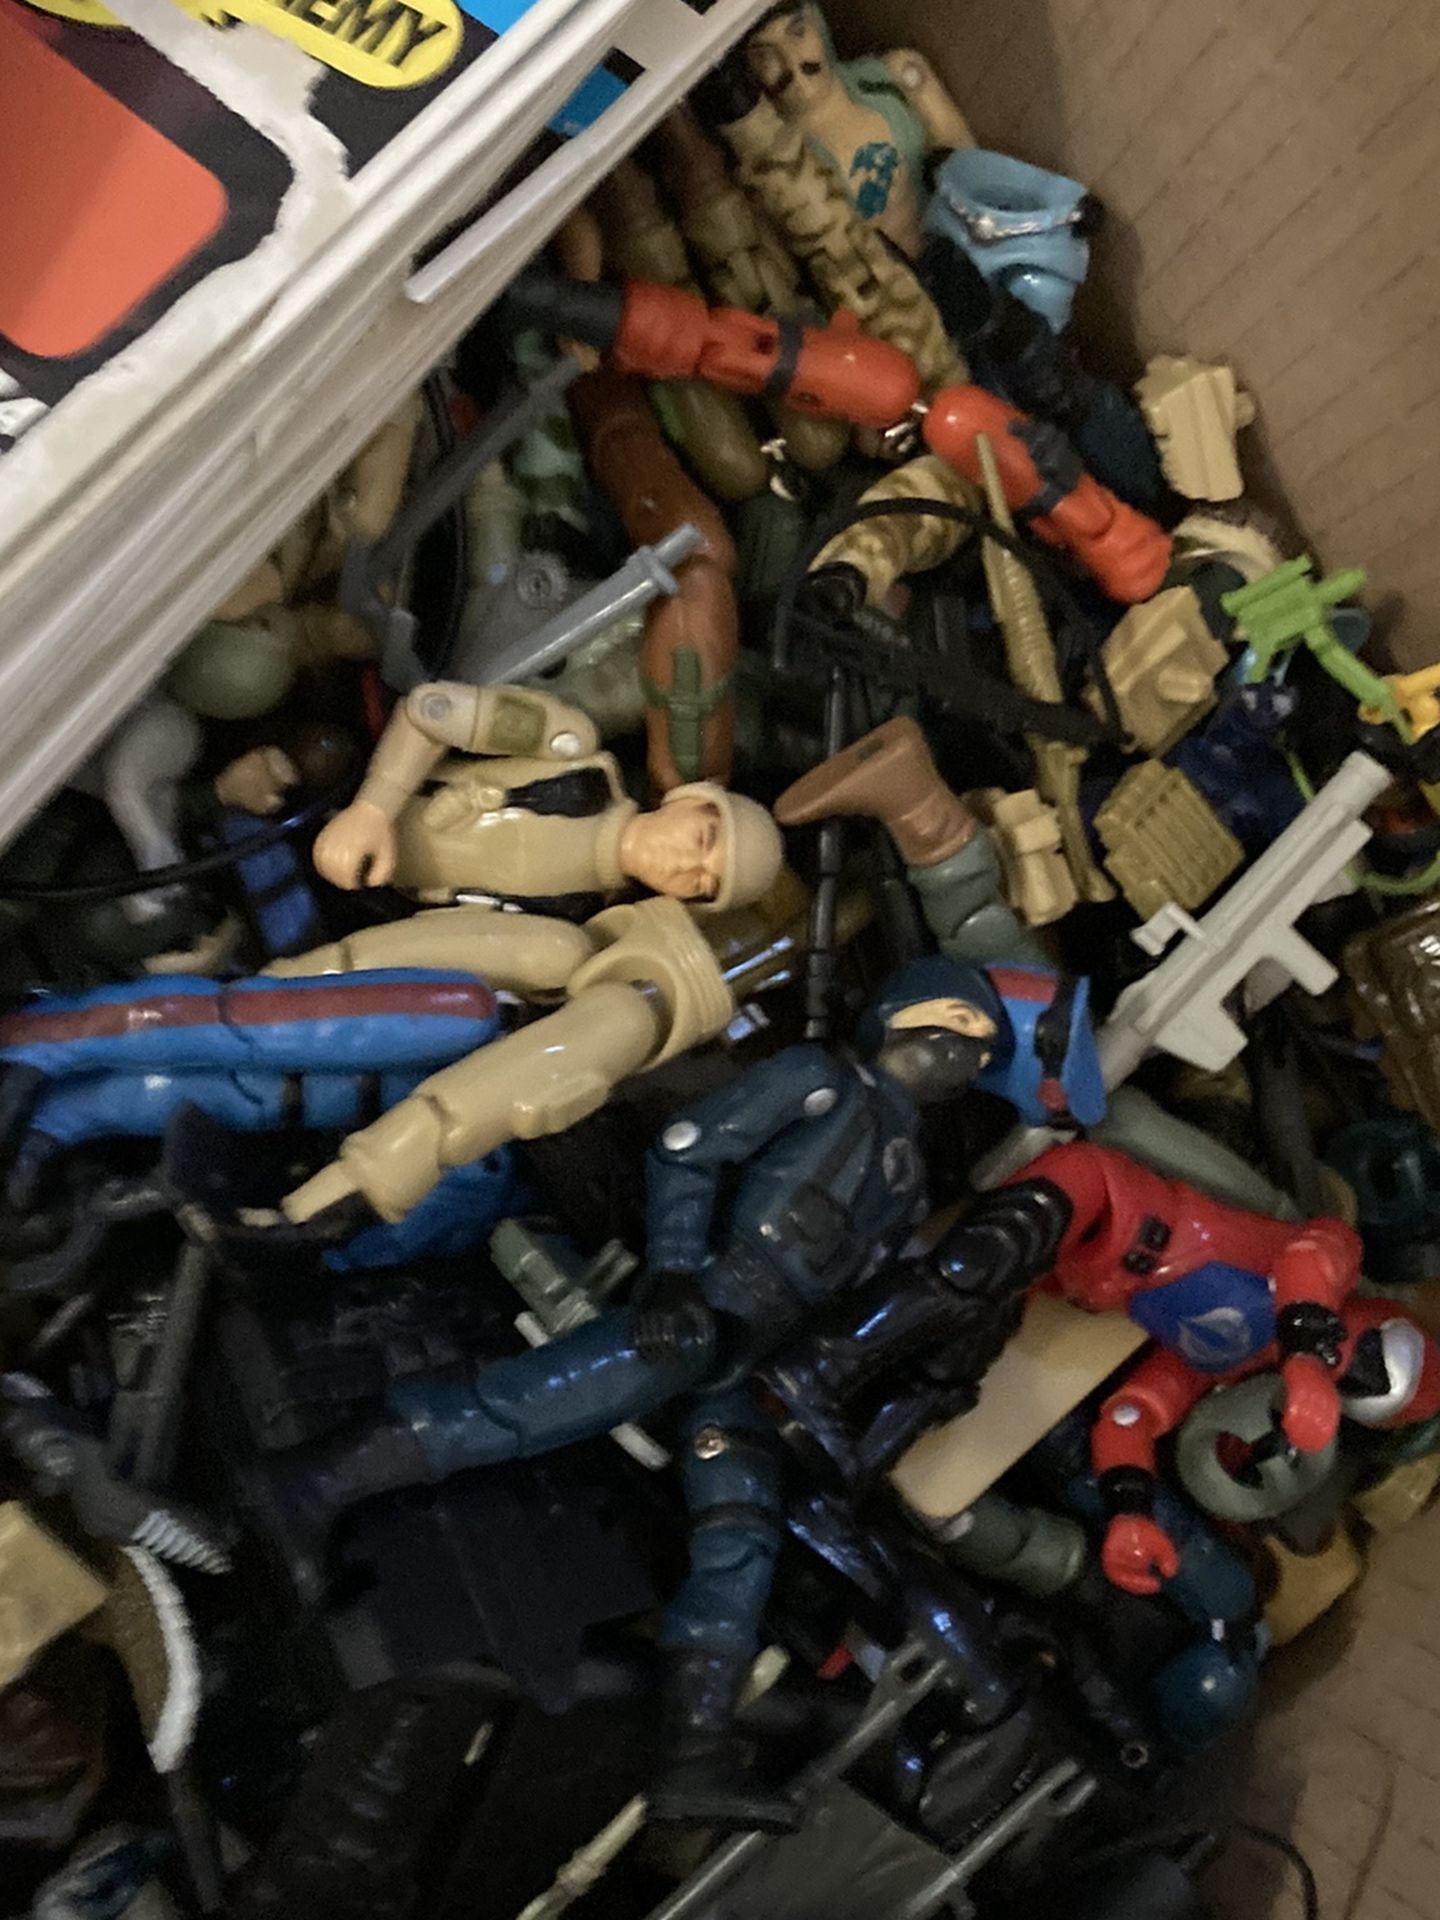 Collector seeking vintage old GI Joe toys dolls and action figures accessories 1960s 70s 80s g.i. Joes toy figure doll collector collectibles ARAH 